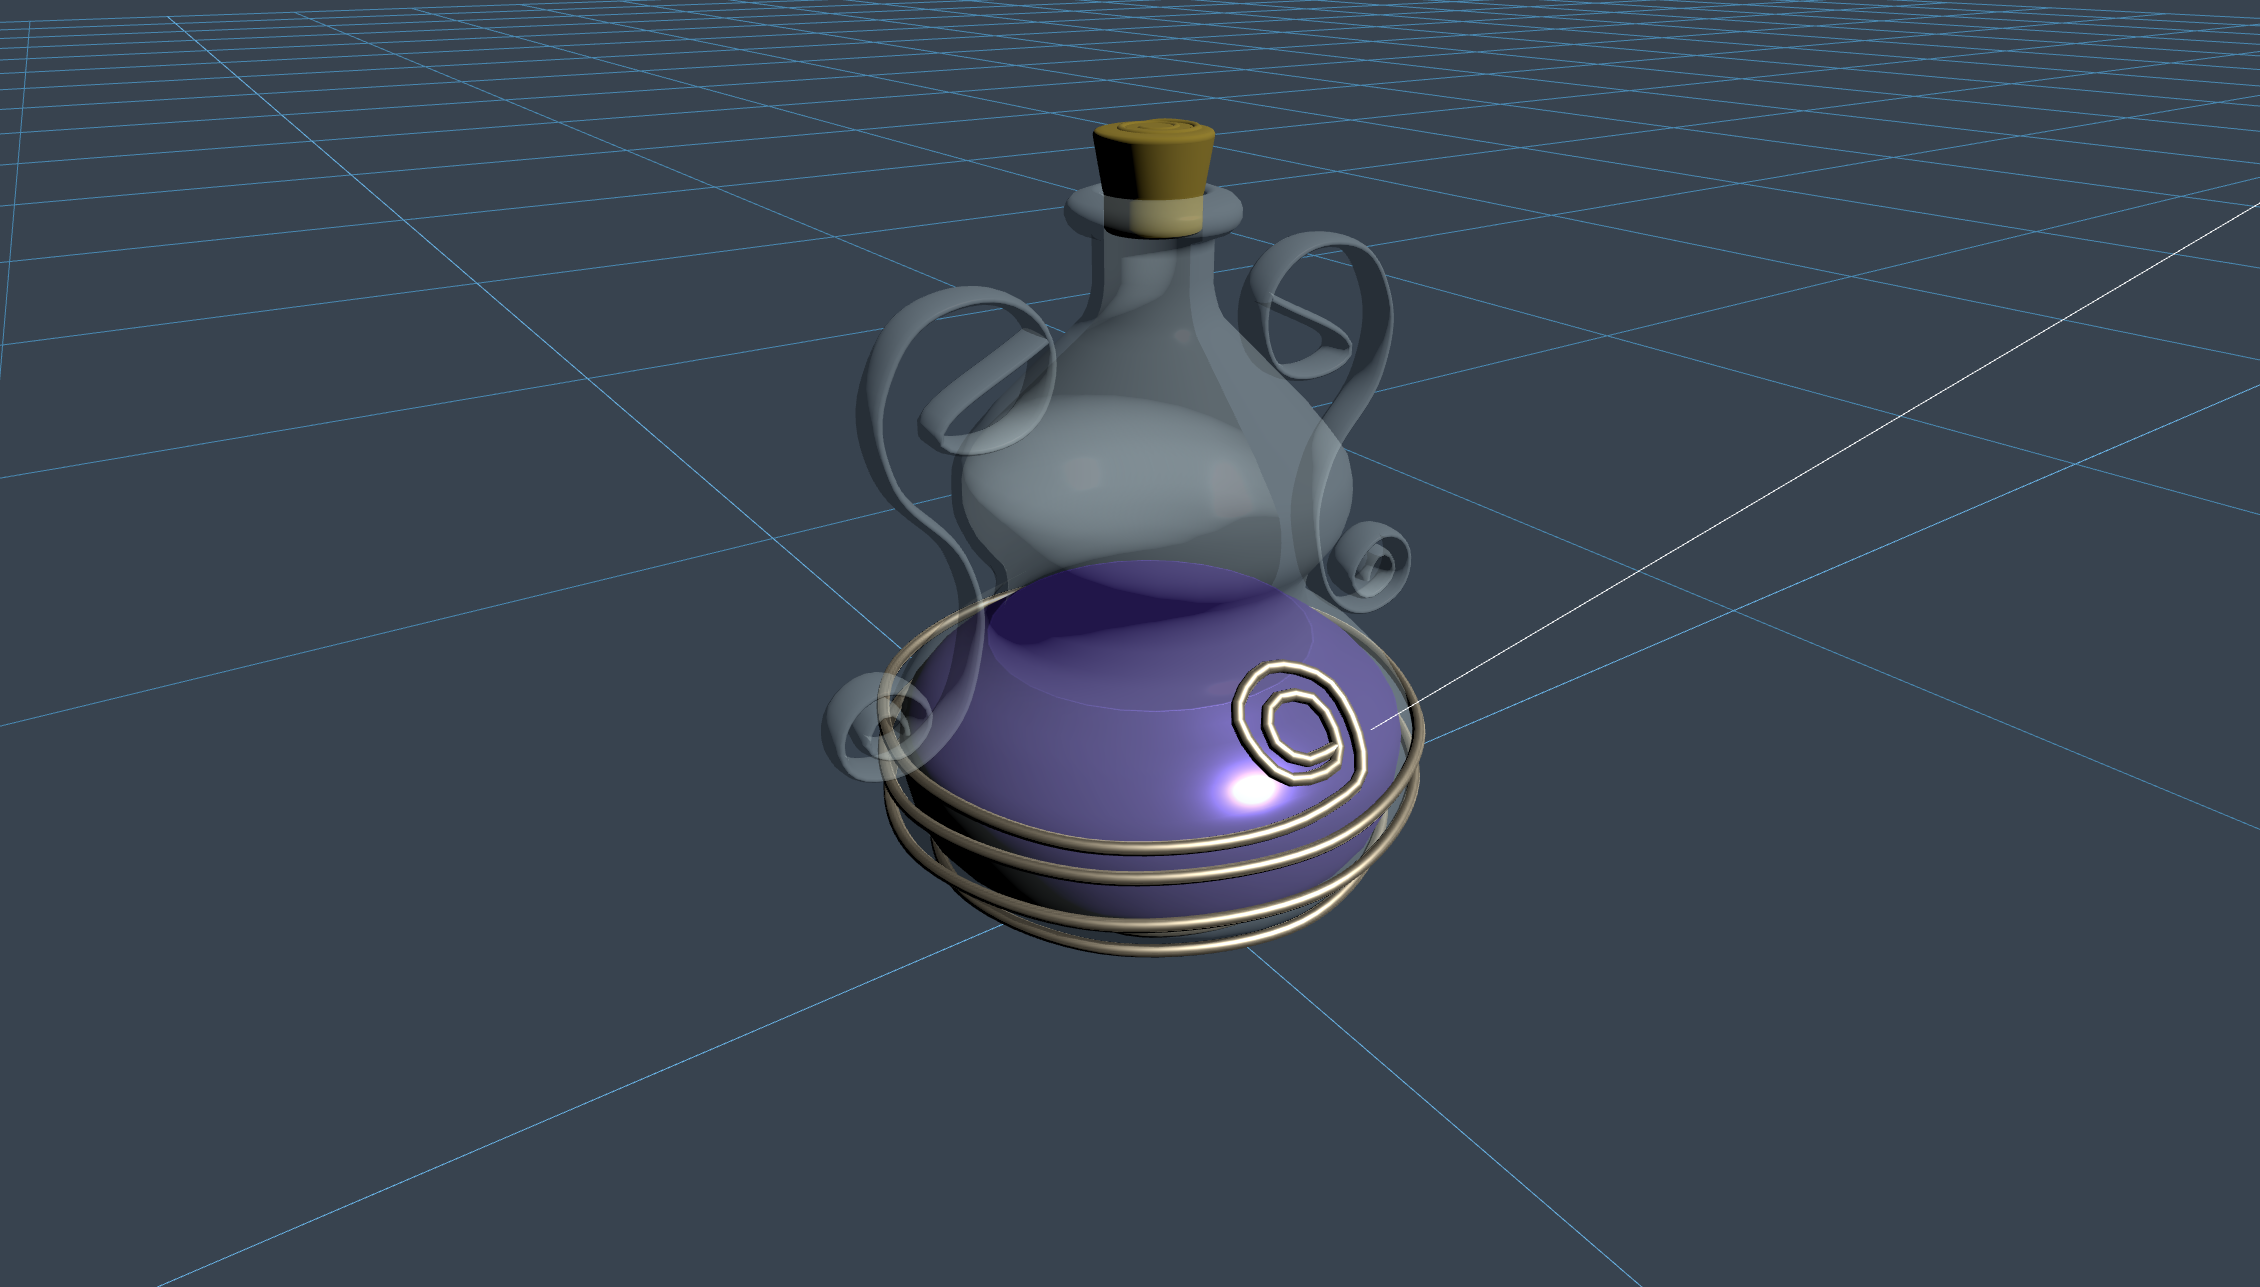 PotionBottle - created by Niilo Korppi with 3D